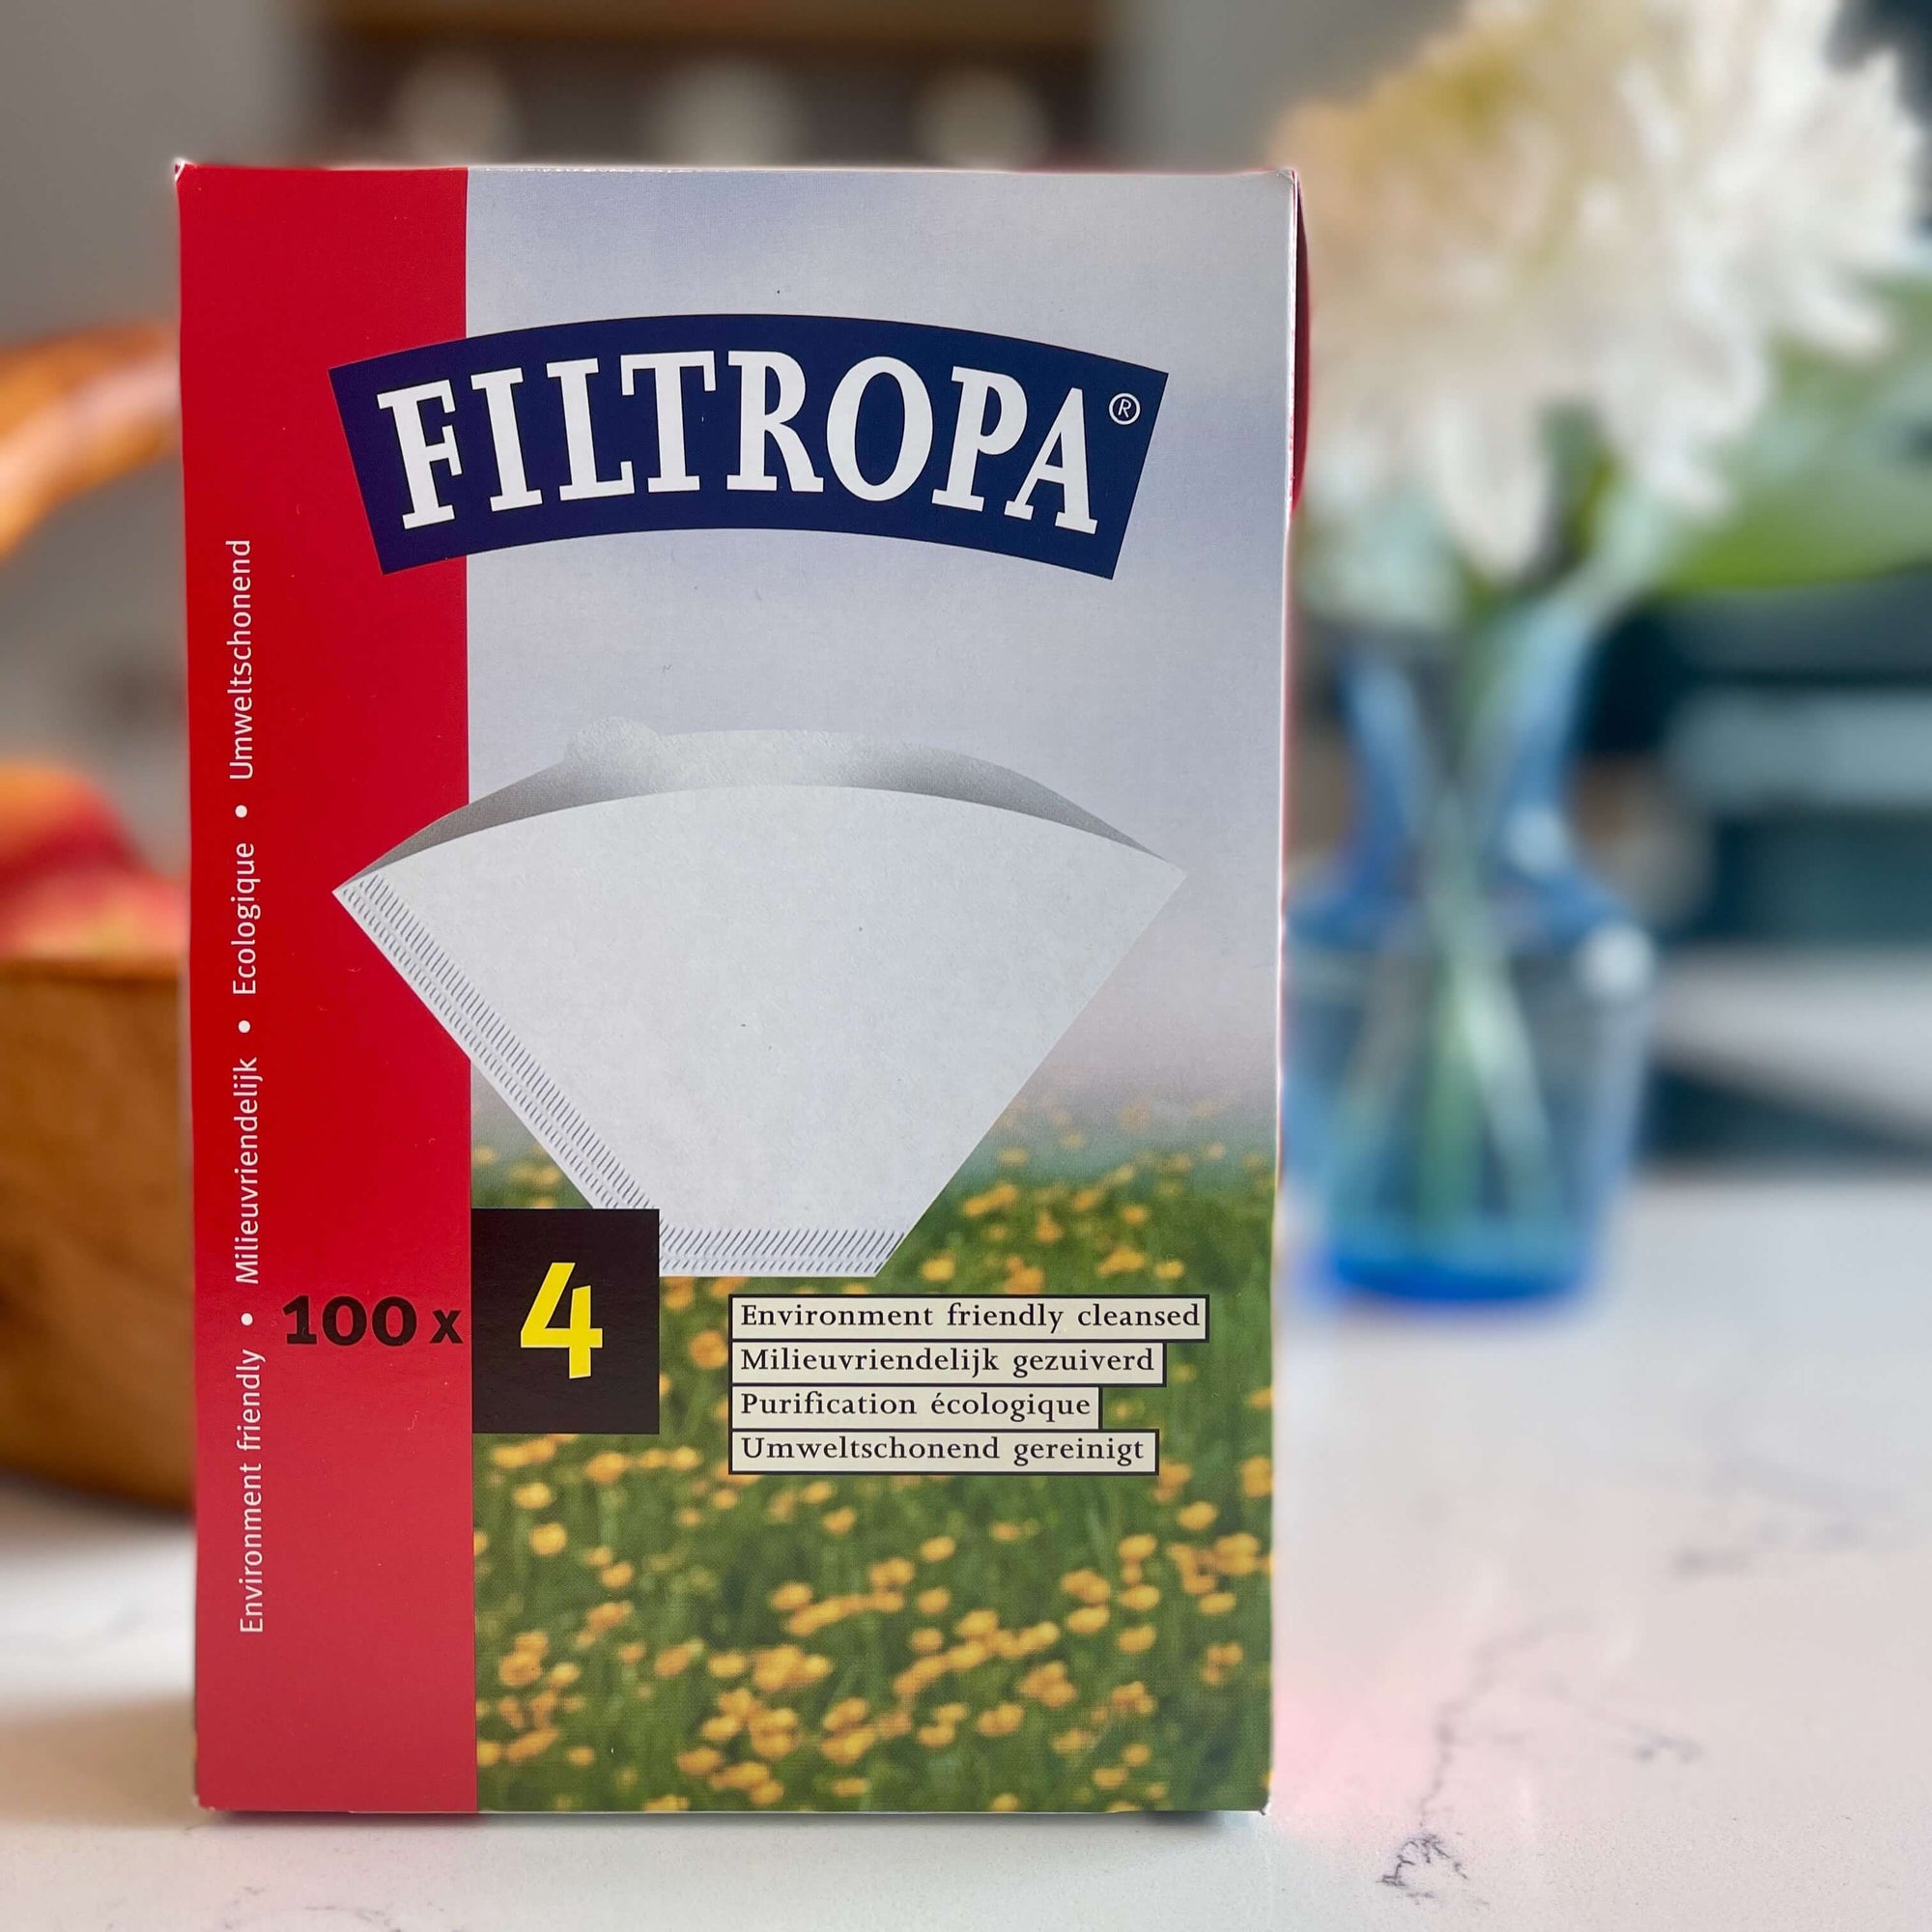 Filtropa Size 4 Filter Papers